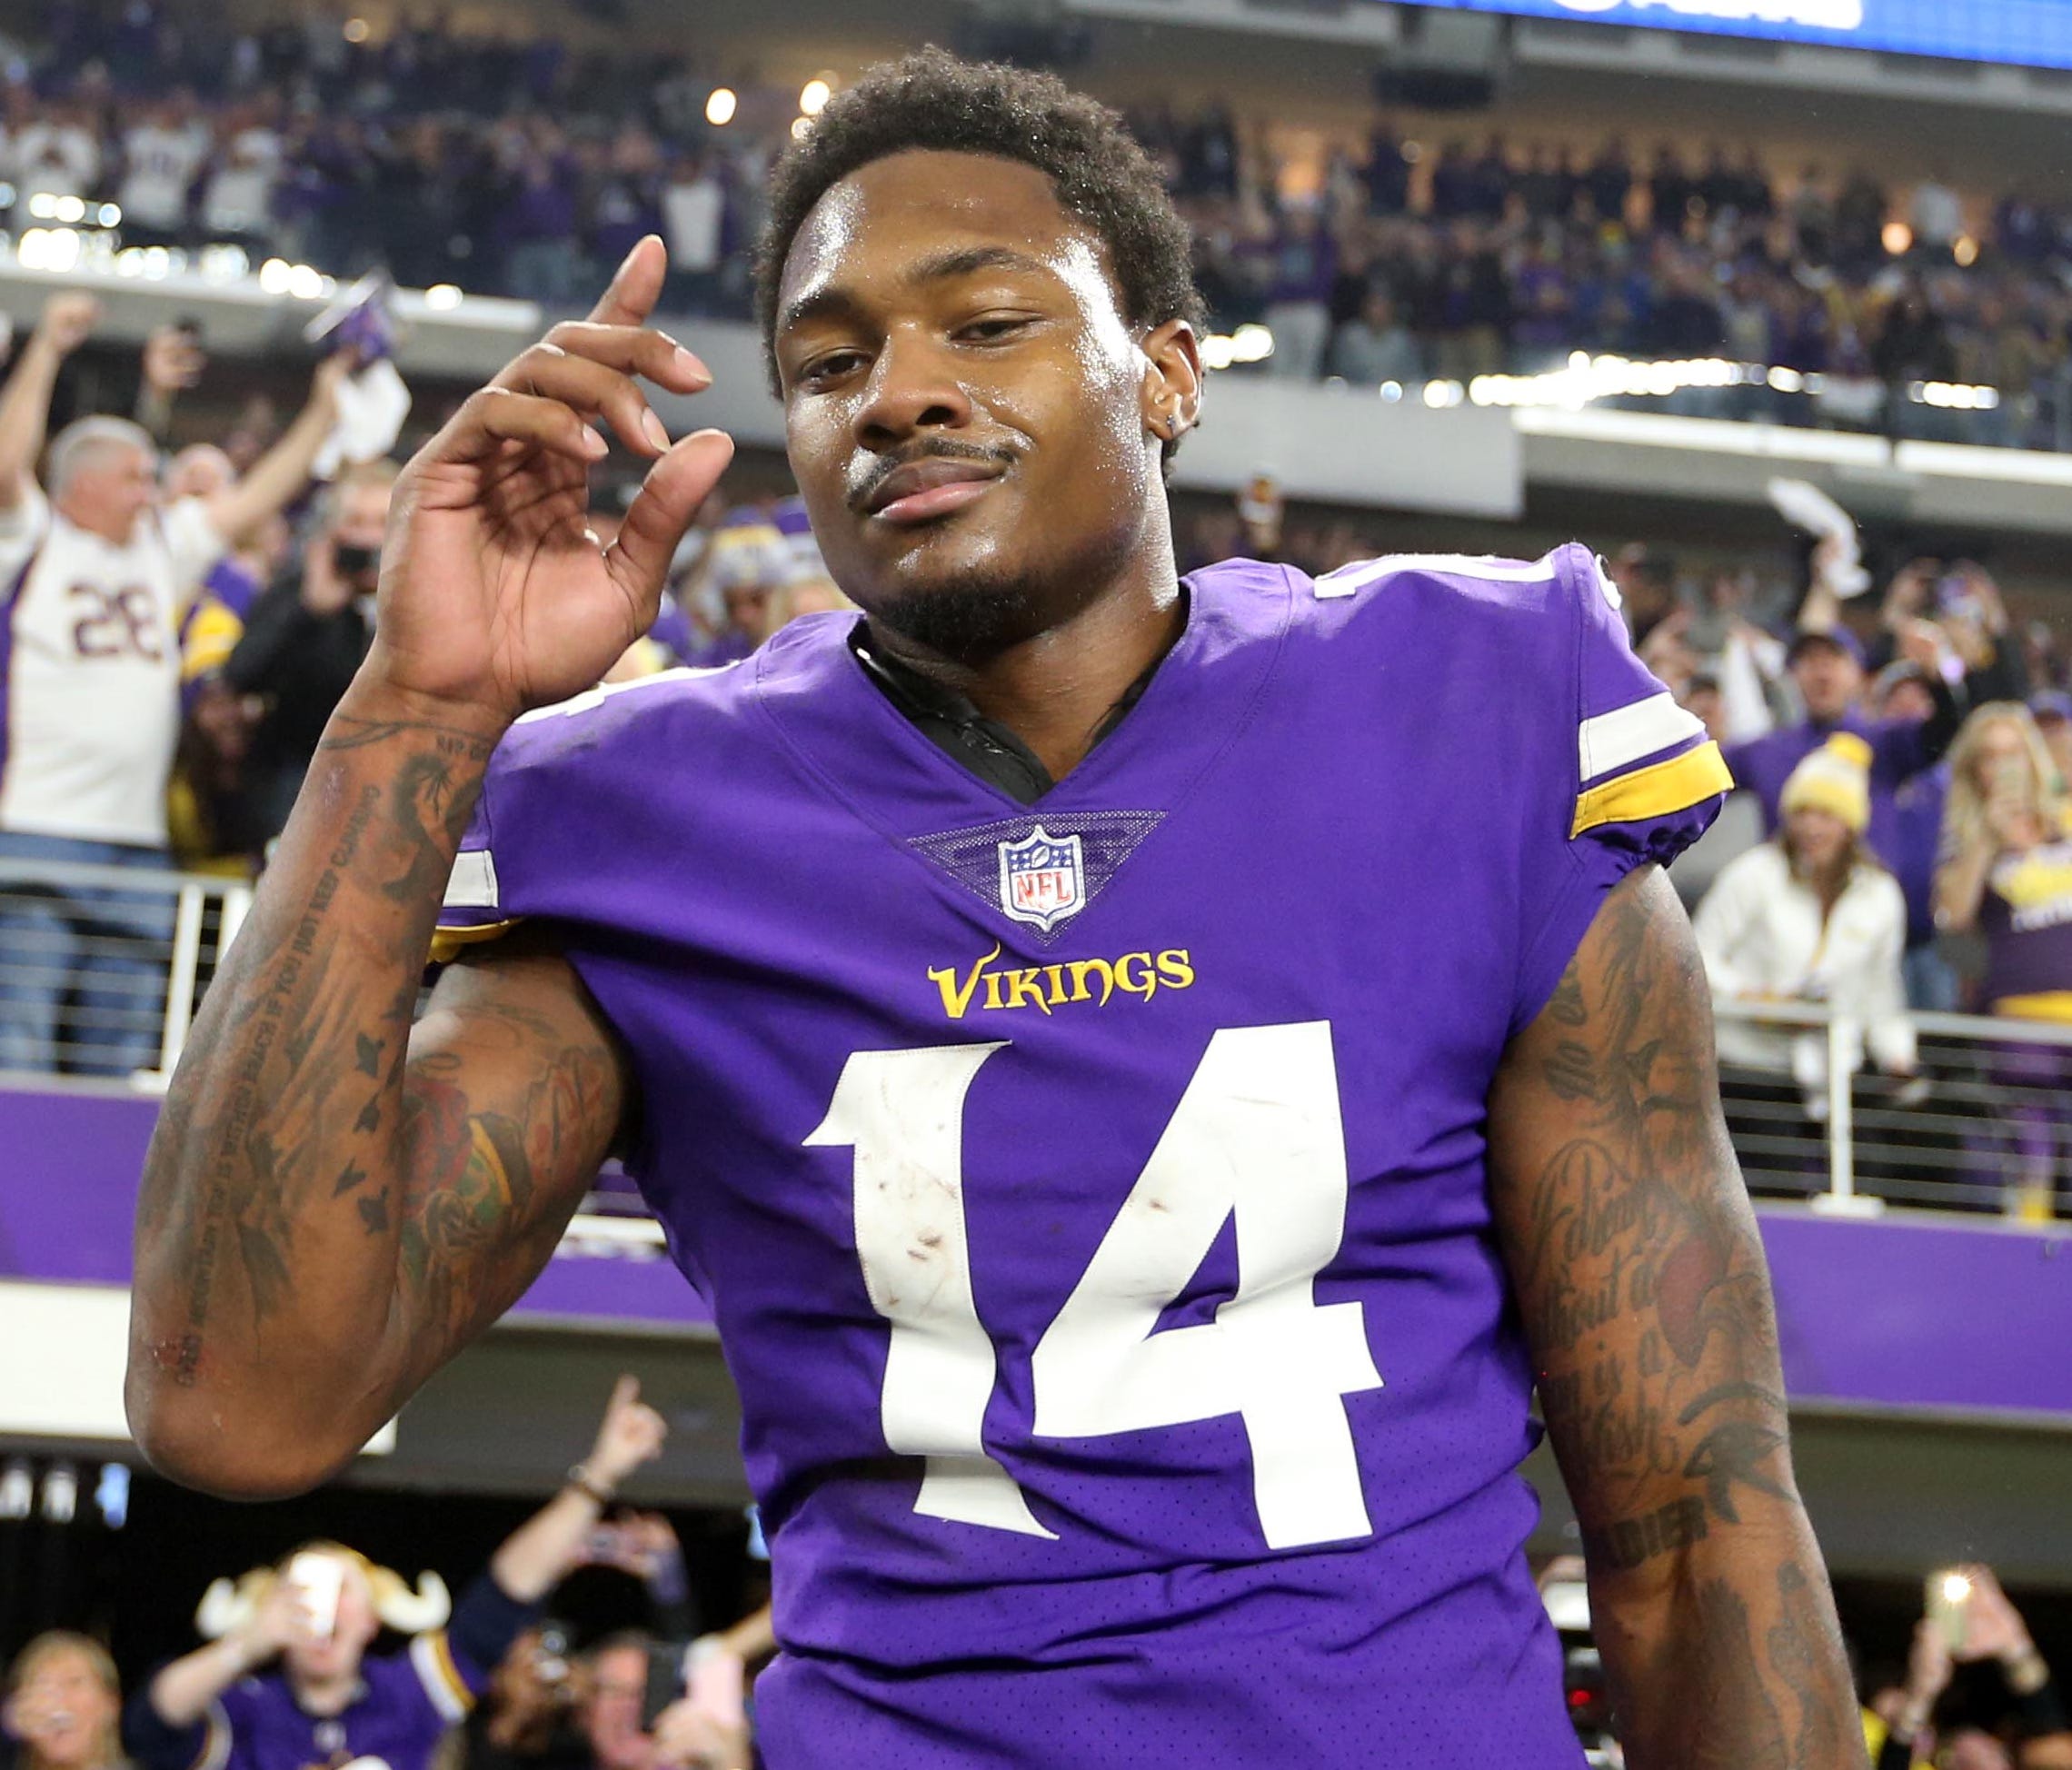 Minnesota Vikings wide receiver Stefon Diggs (14) celebrates after the NFC Divisional Playoff football game against the New Orleans Saints at U.S. Bank Stadium.